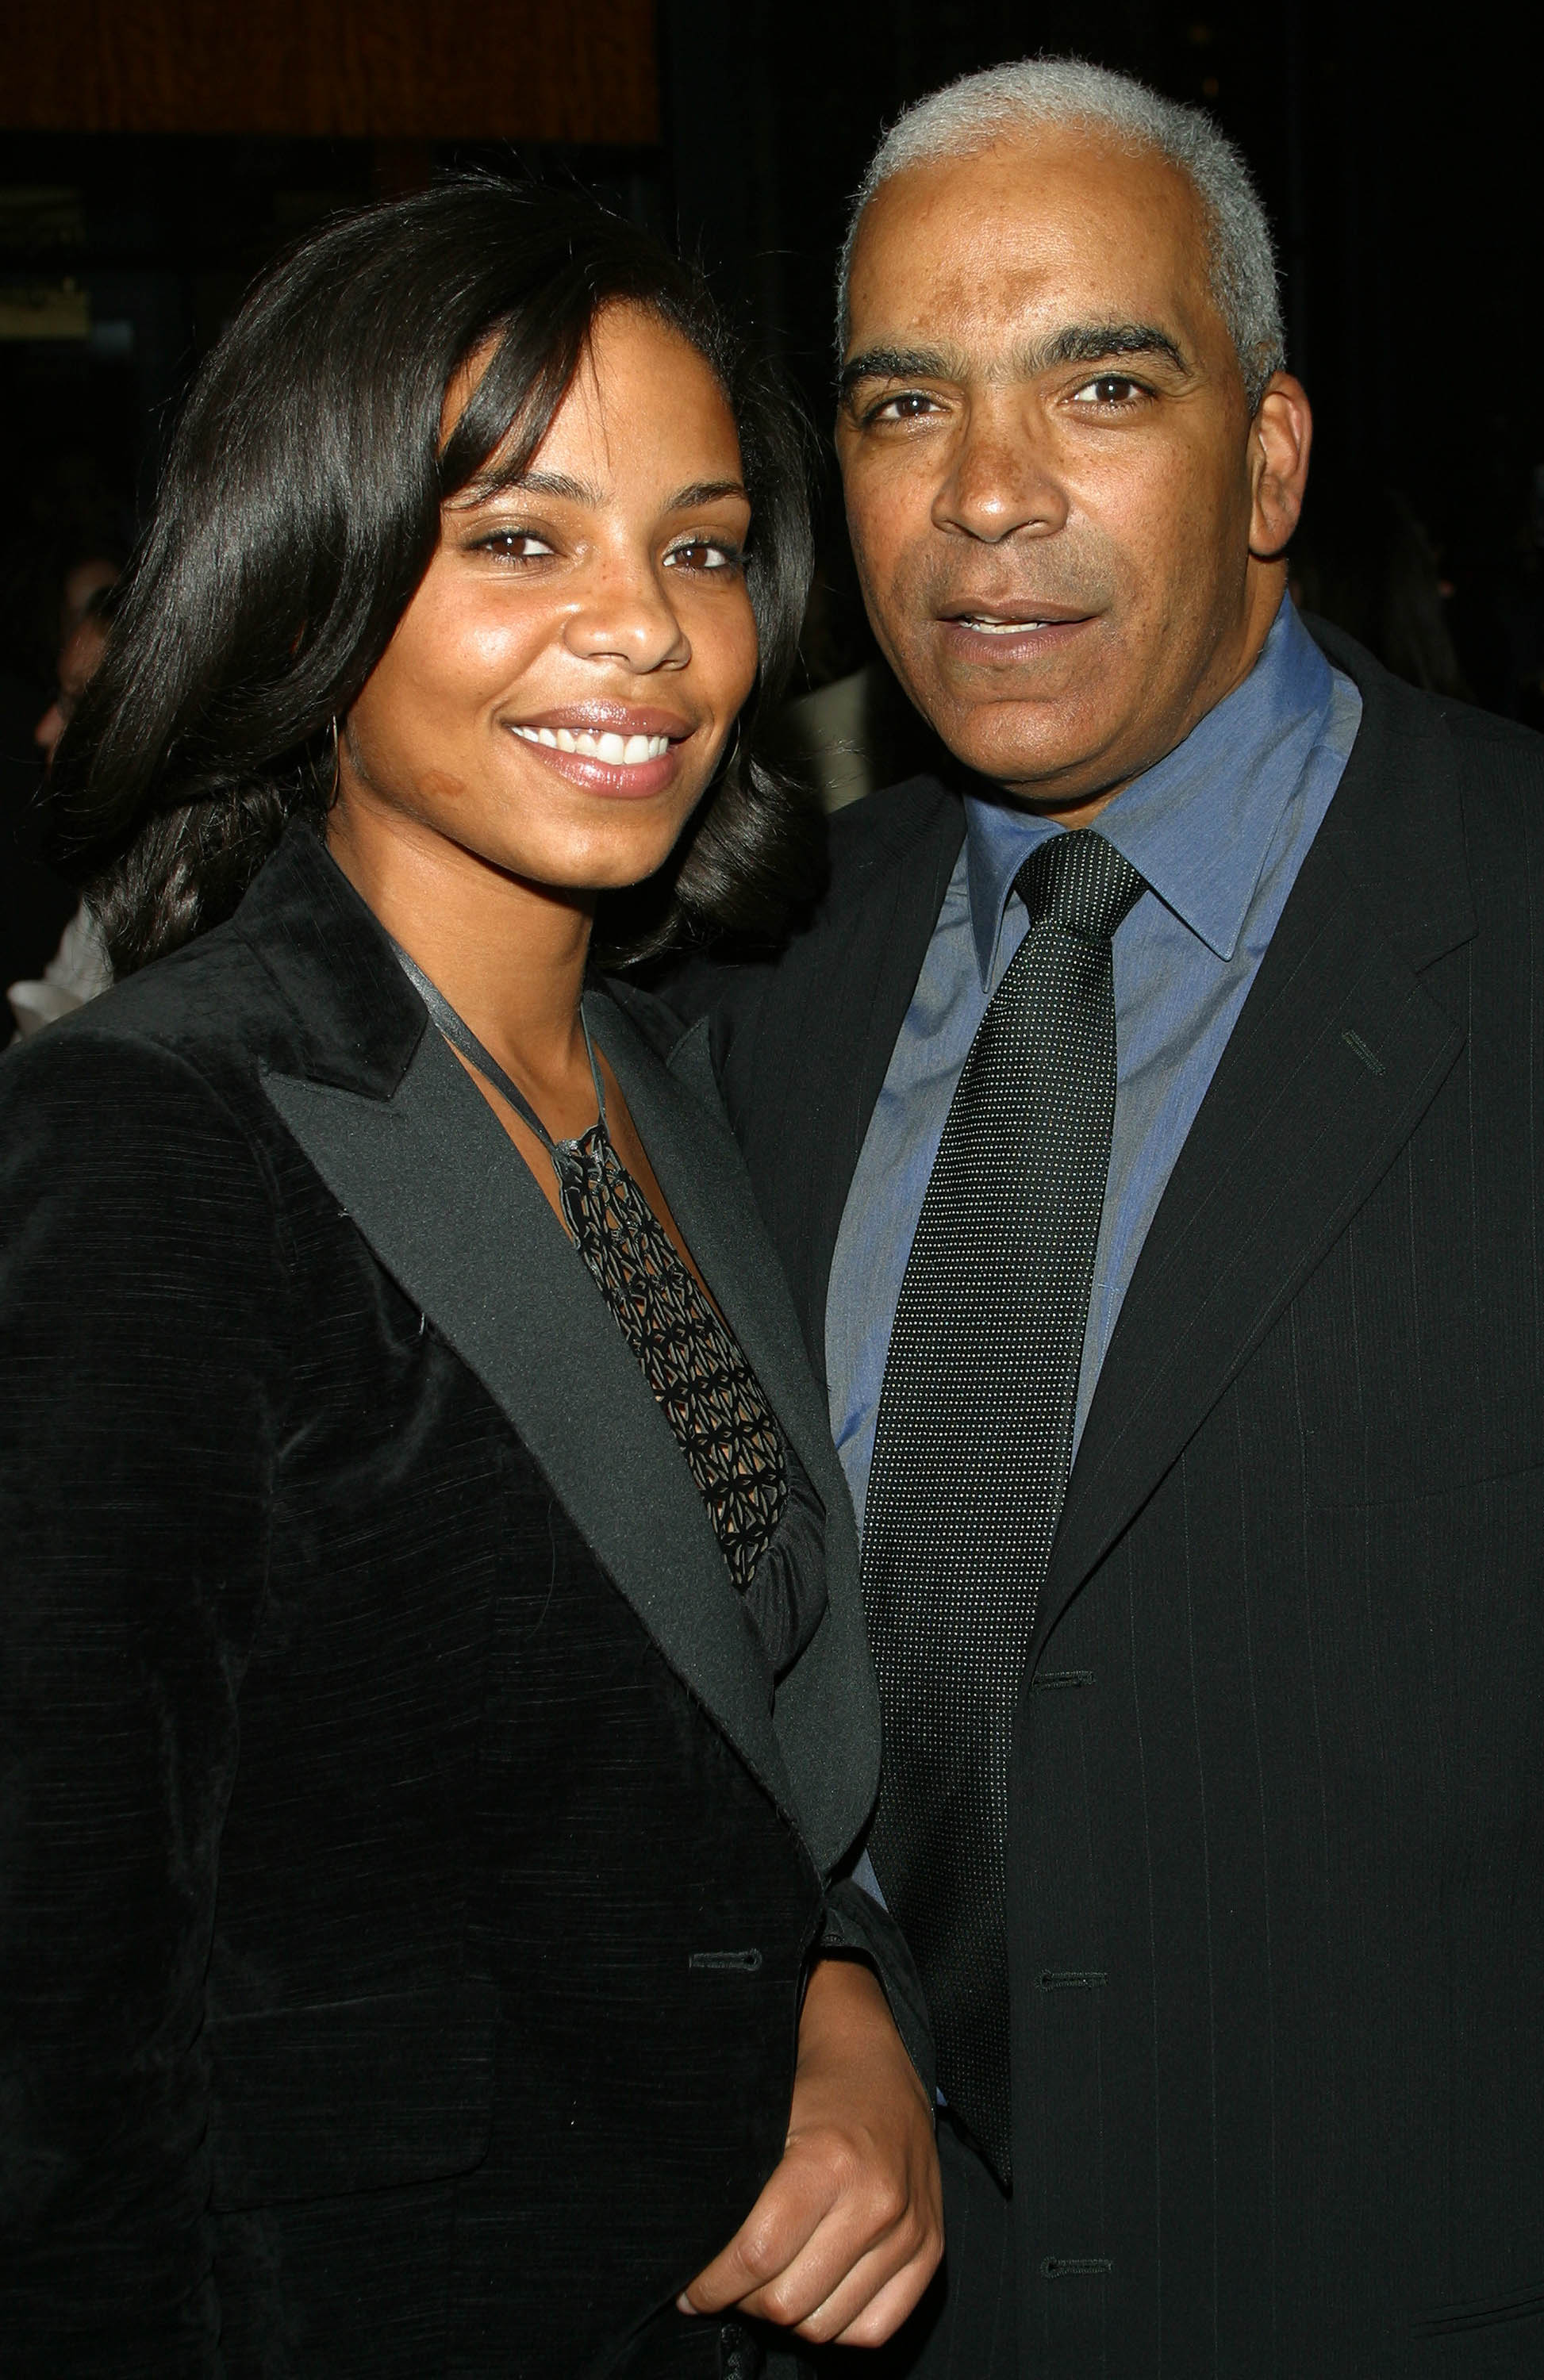 Sanaa Lathan's Father Stan Lathan Is a Famous TV Director — Meet Him